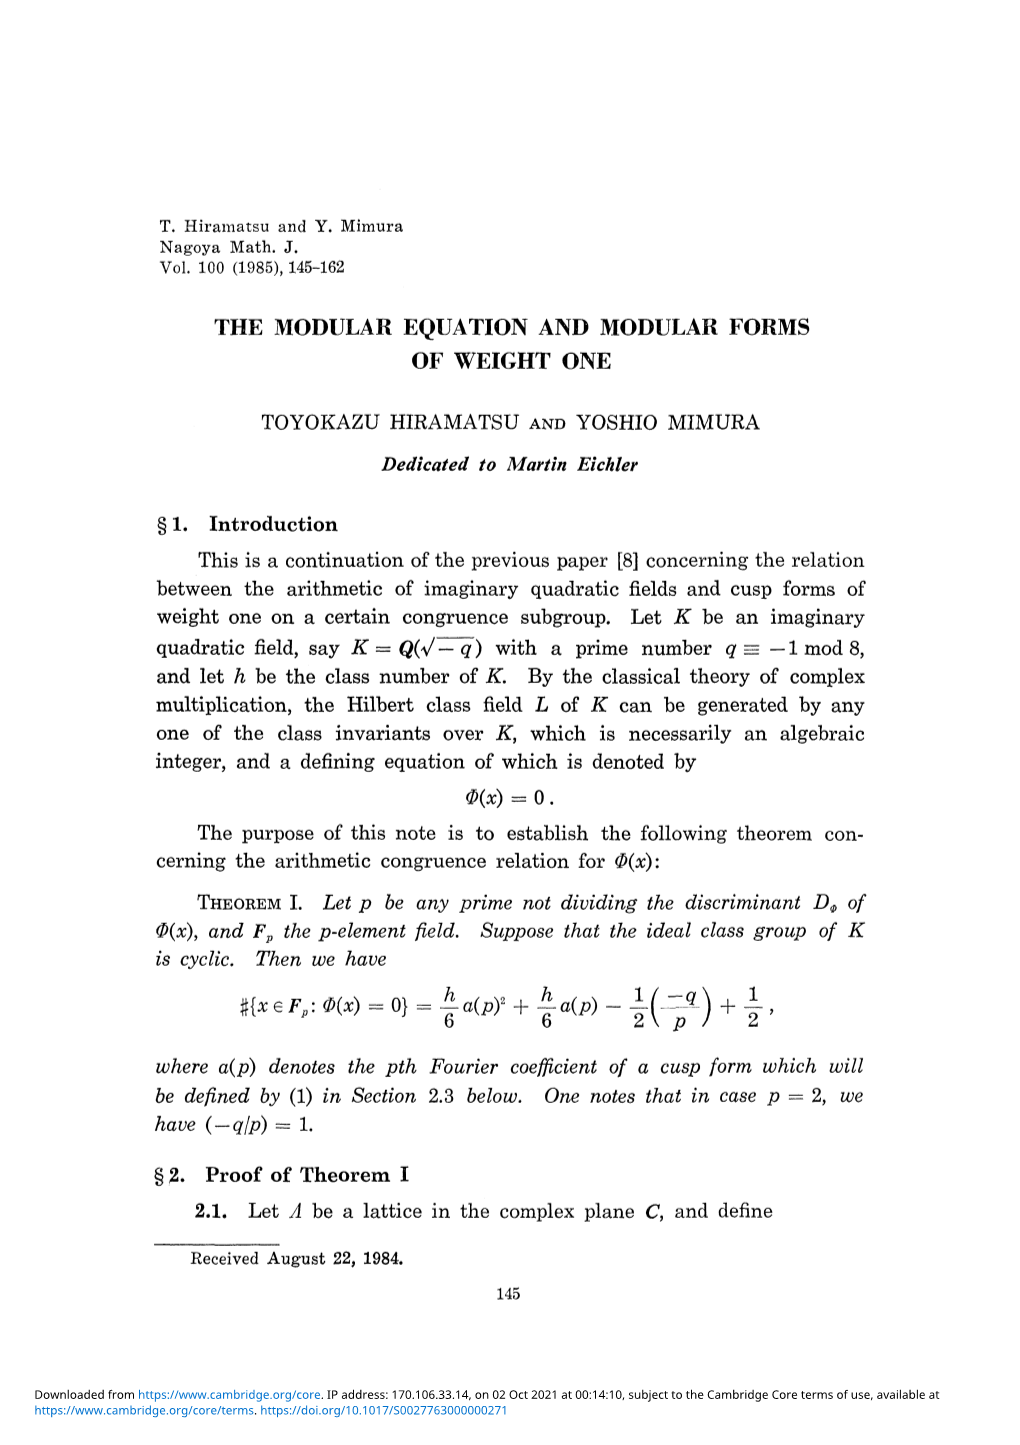 The Modular Equation and Modular Forms of Weight One